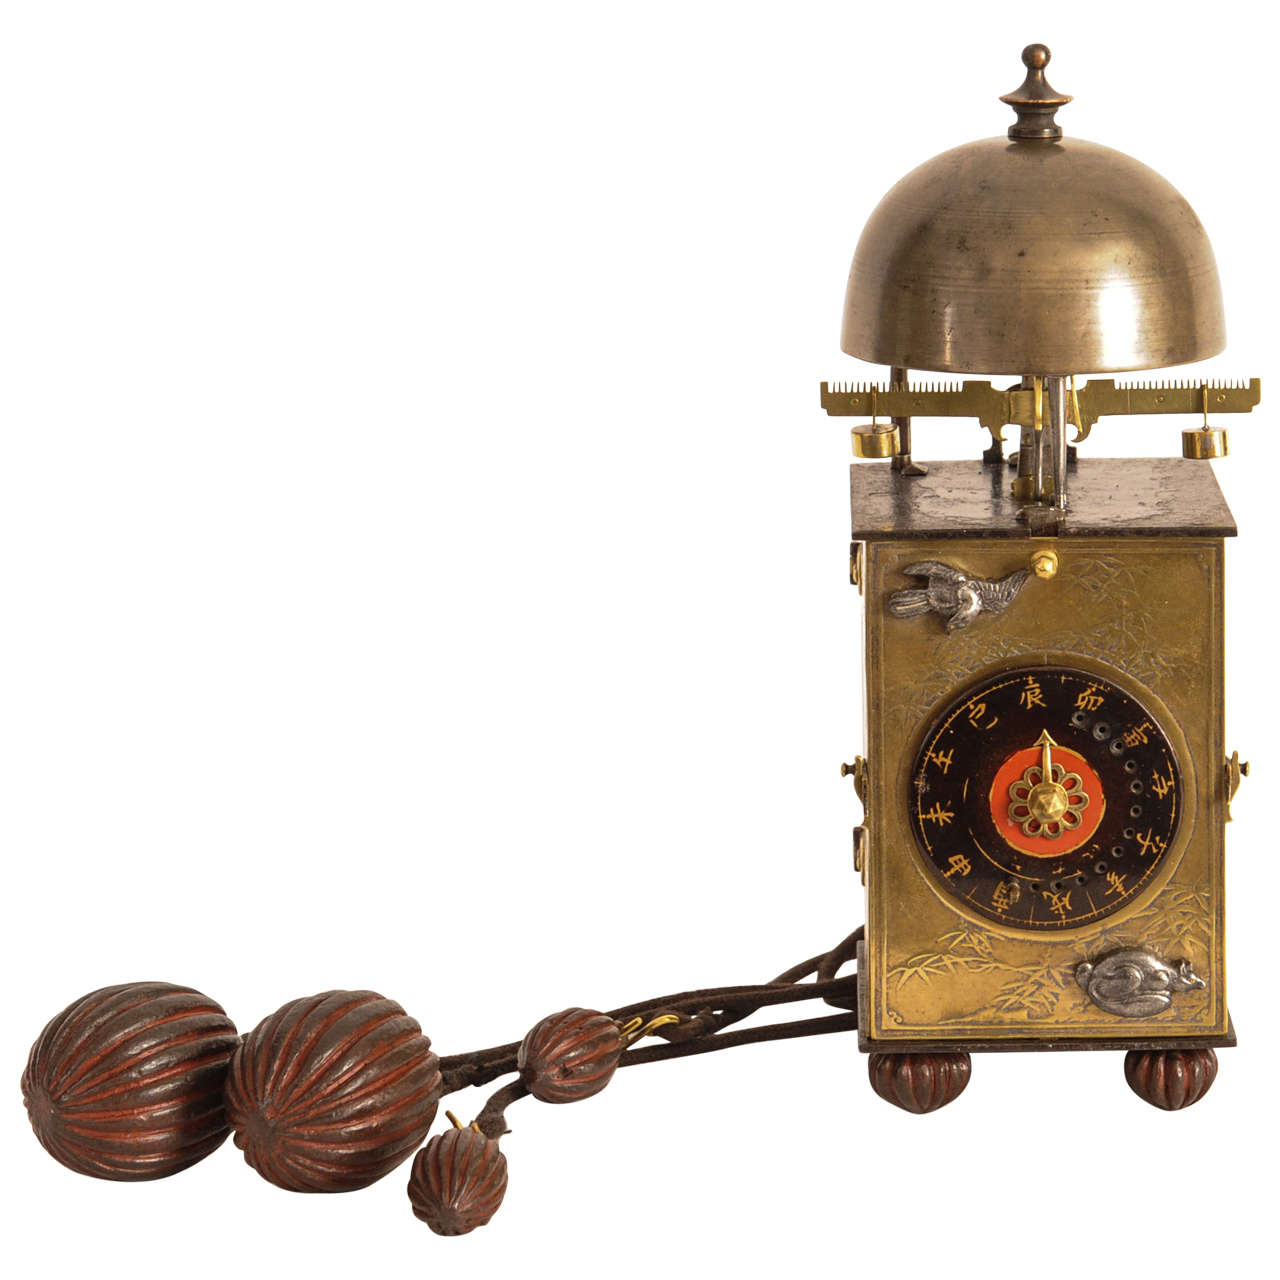 A Small Japanese Brass Lantern Clock with Foliot Escapement, circa 1800 For Sale